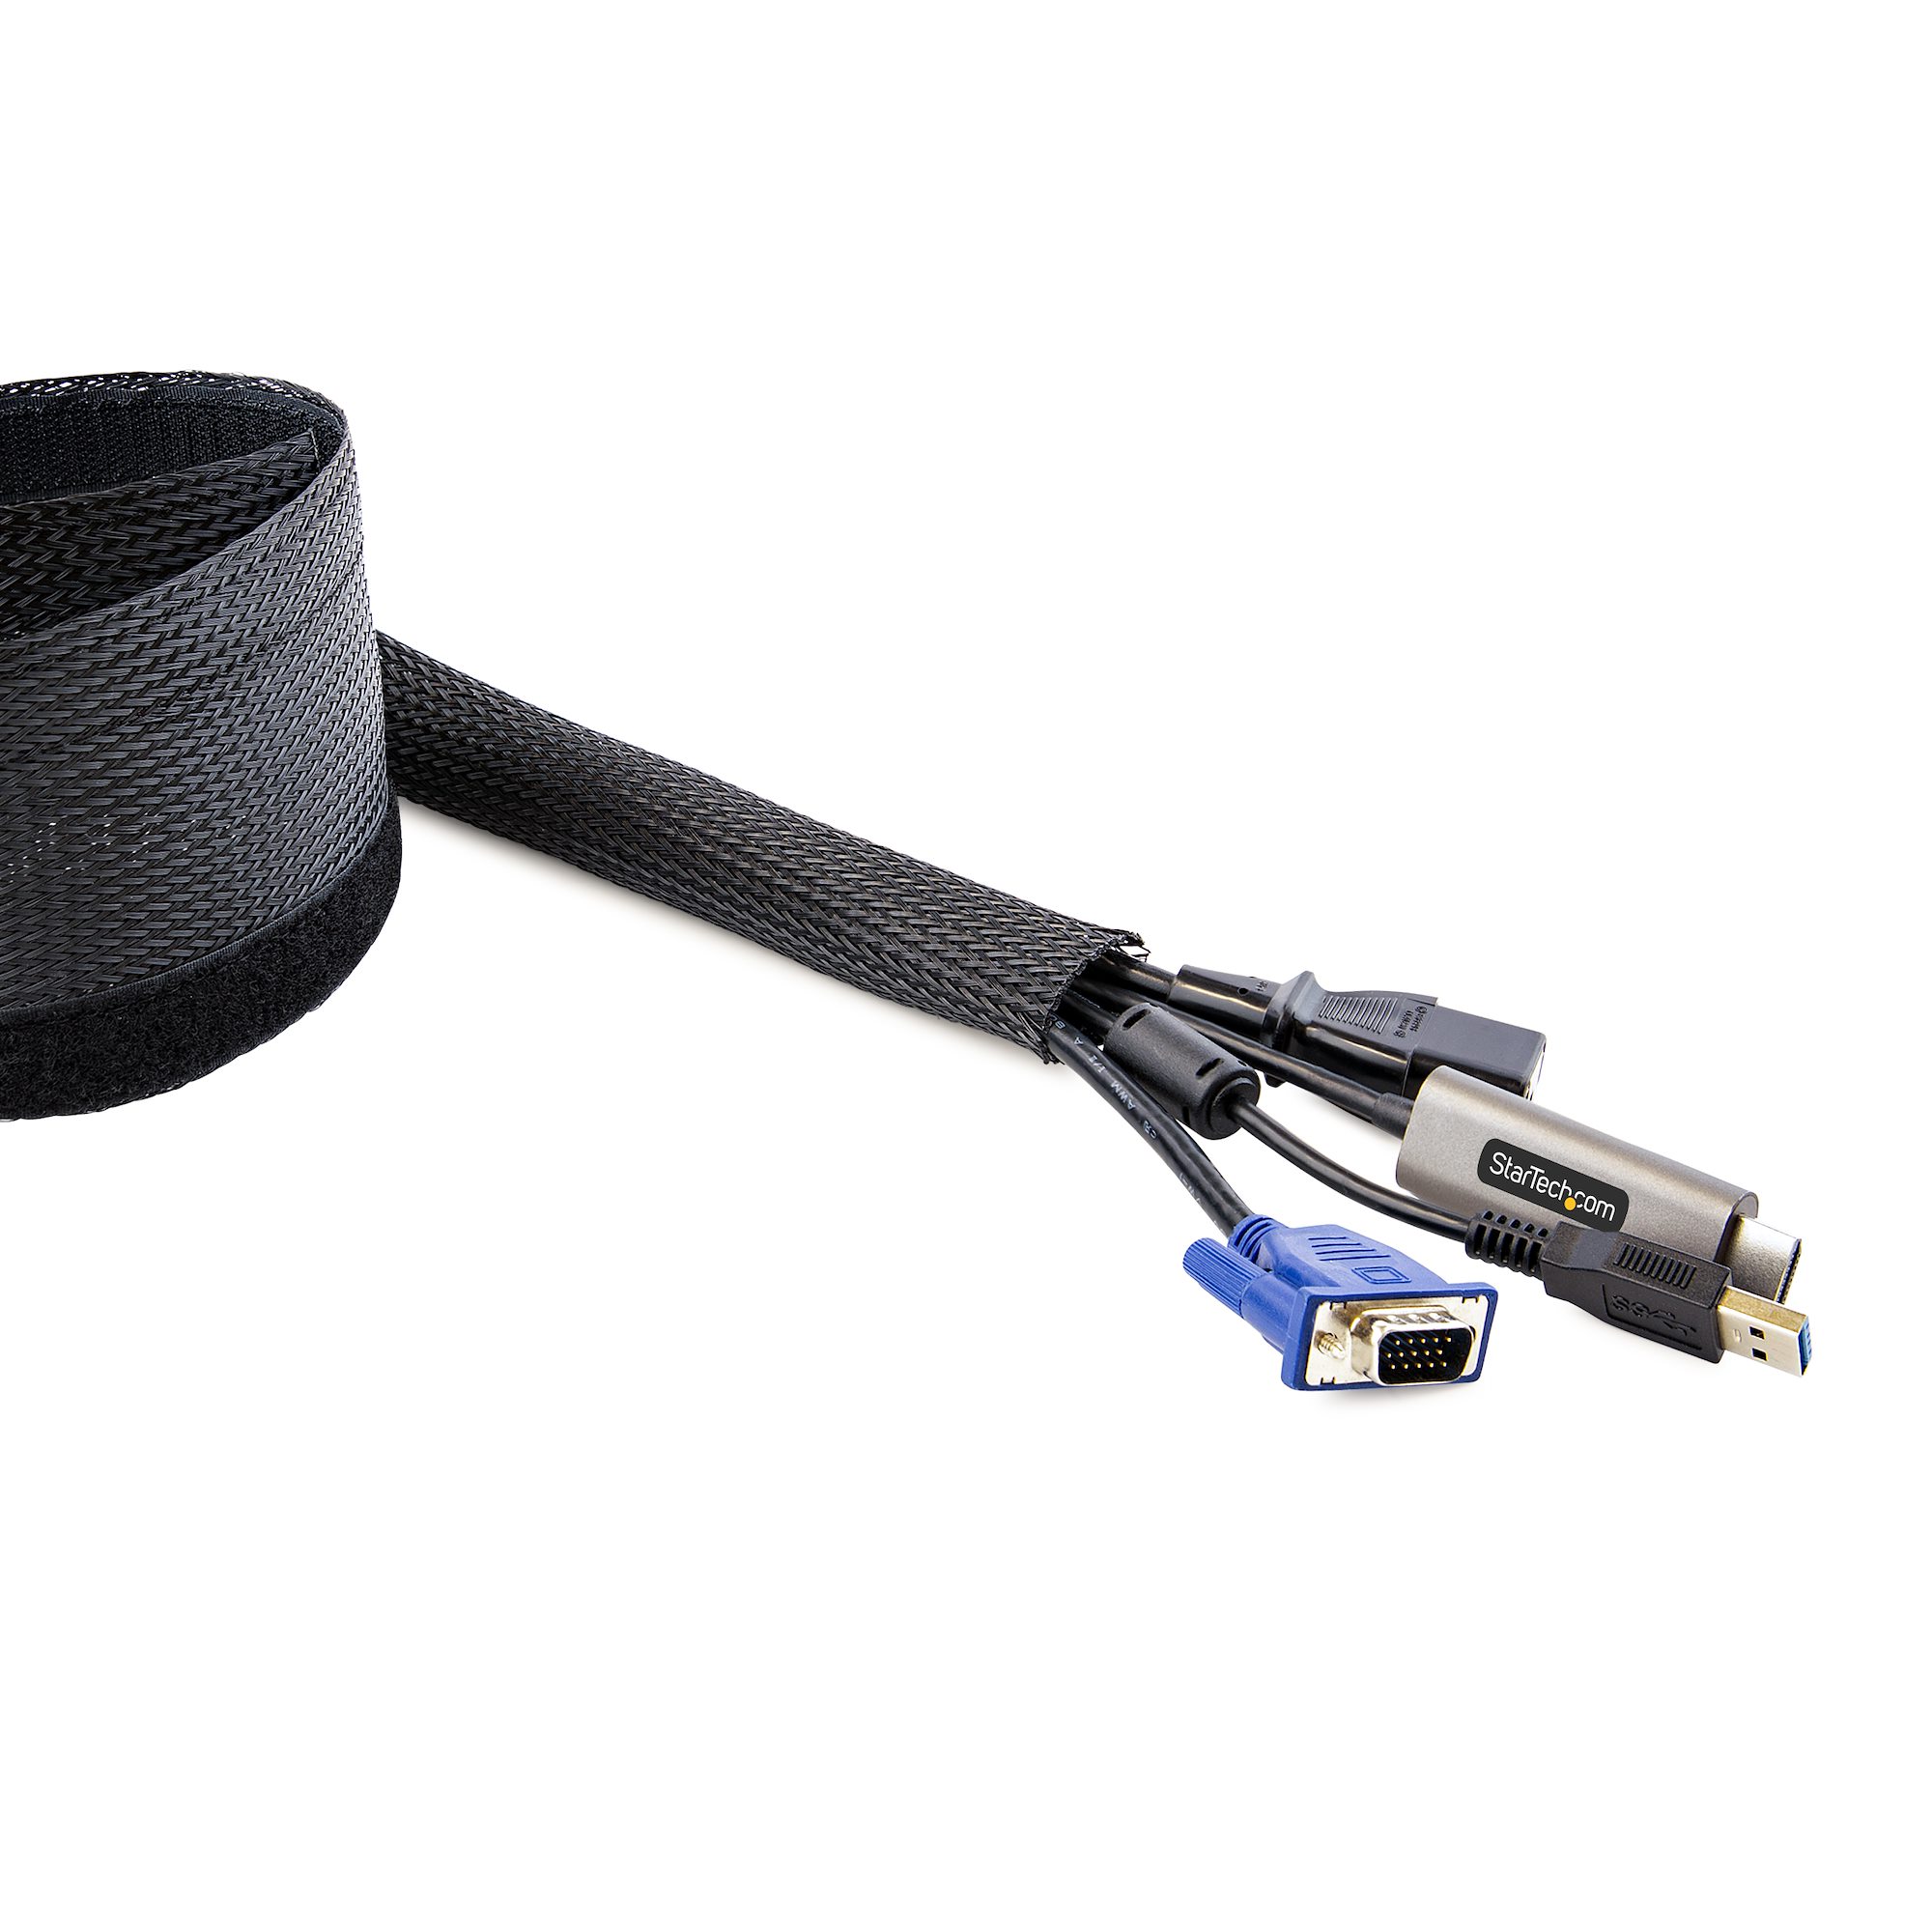 Cable Management Sleeve, Wire Wraps - Cable Routing Solutions